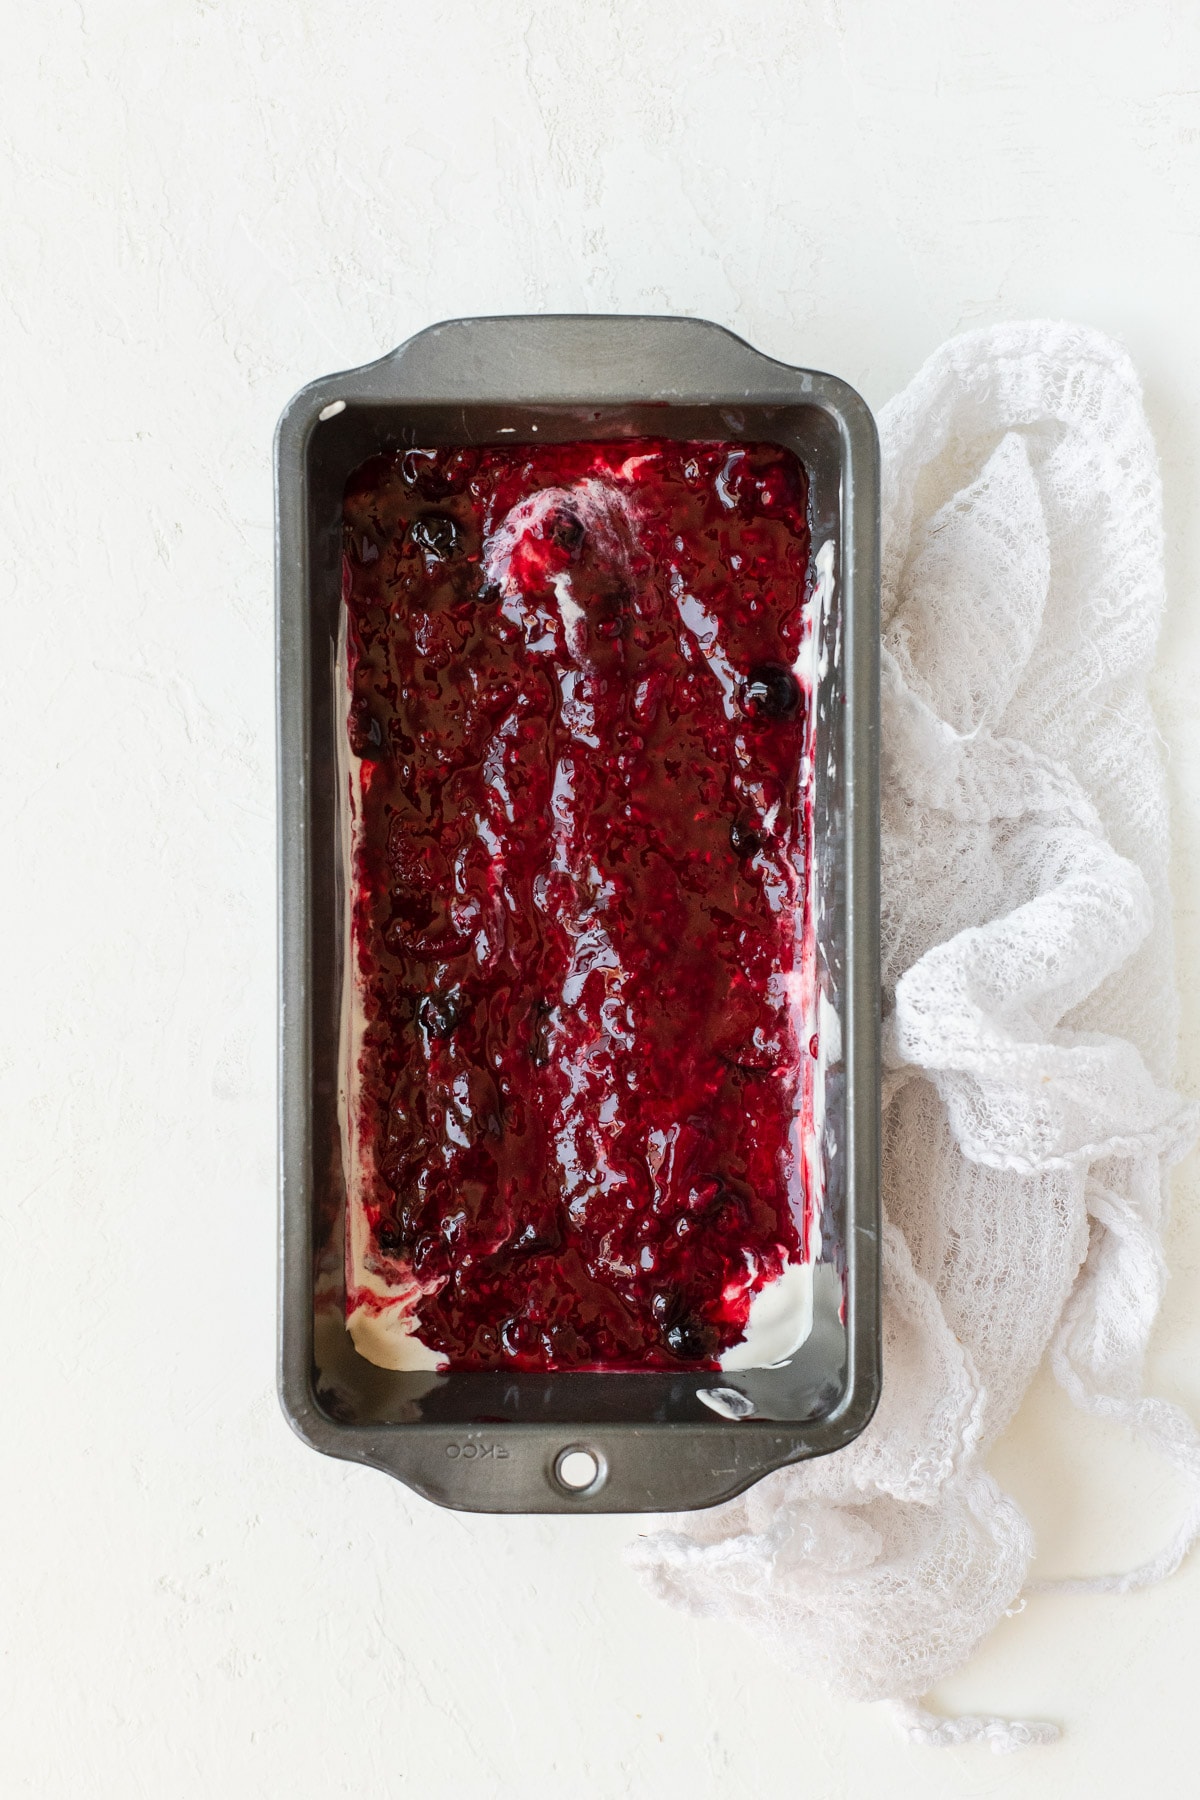 A layer of berry compote spread over ice cream in a metal loaf pan.